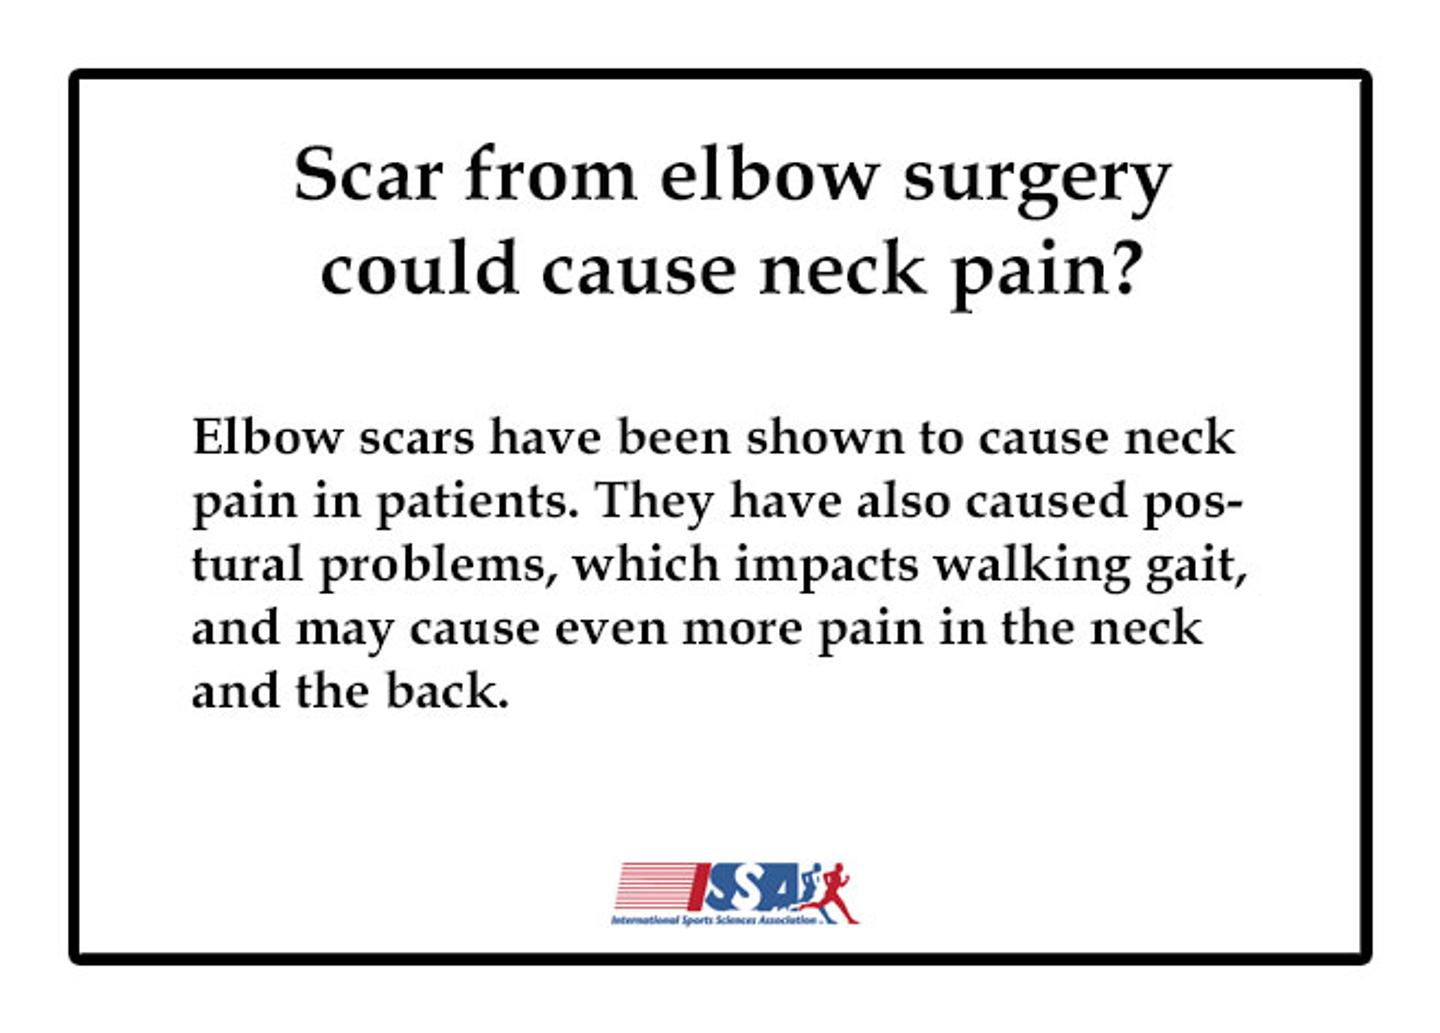 Who would have thought that a scar from elbow surgery could cause neck pain?